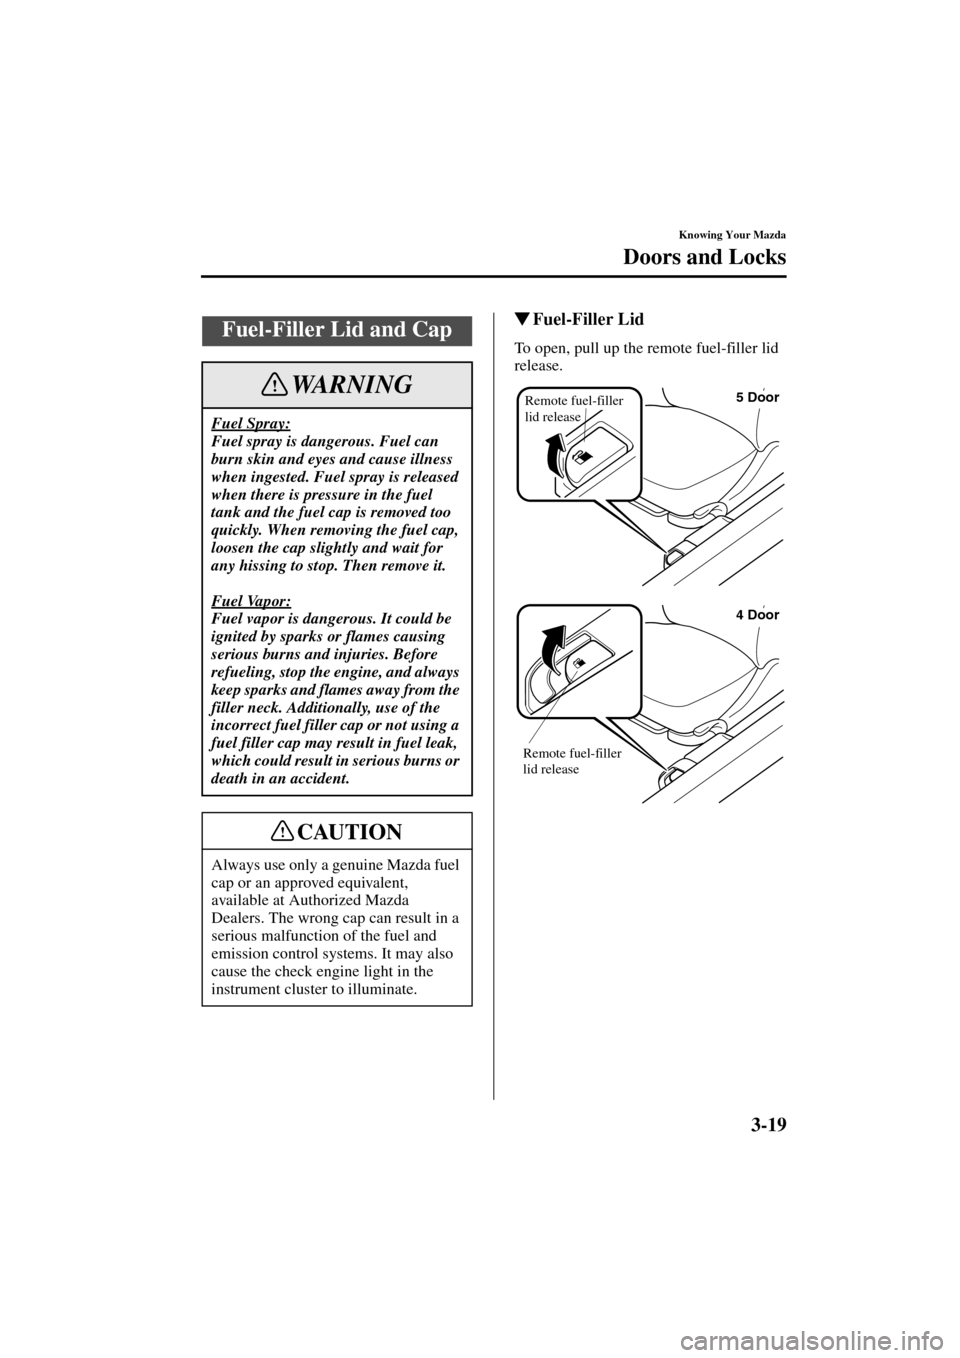 MAZDA MODEL 3 HATCHBACK 2004  Owners Manual (in English) 3-19
Knowing Your Mazda
Doors and Locks
Form No. 8S18-EA-03I
Fuel-Filler Lid
To open, pull up the remote fuel-filler lid 
release.
Fuel-Filler Lid and Cap
Fuel Spray:
Fuel spray is dangerous. Fuel ca